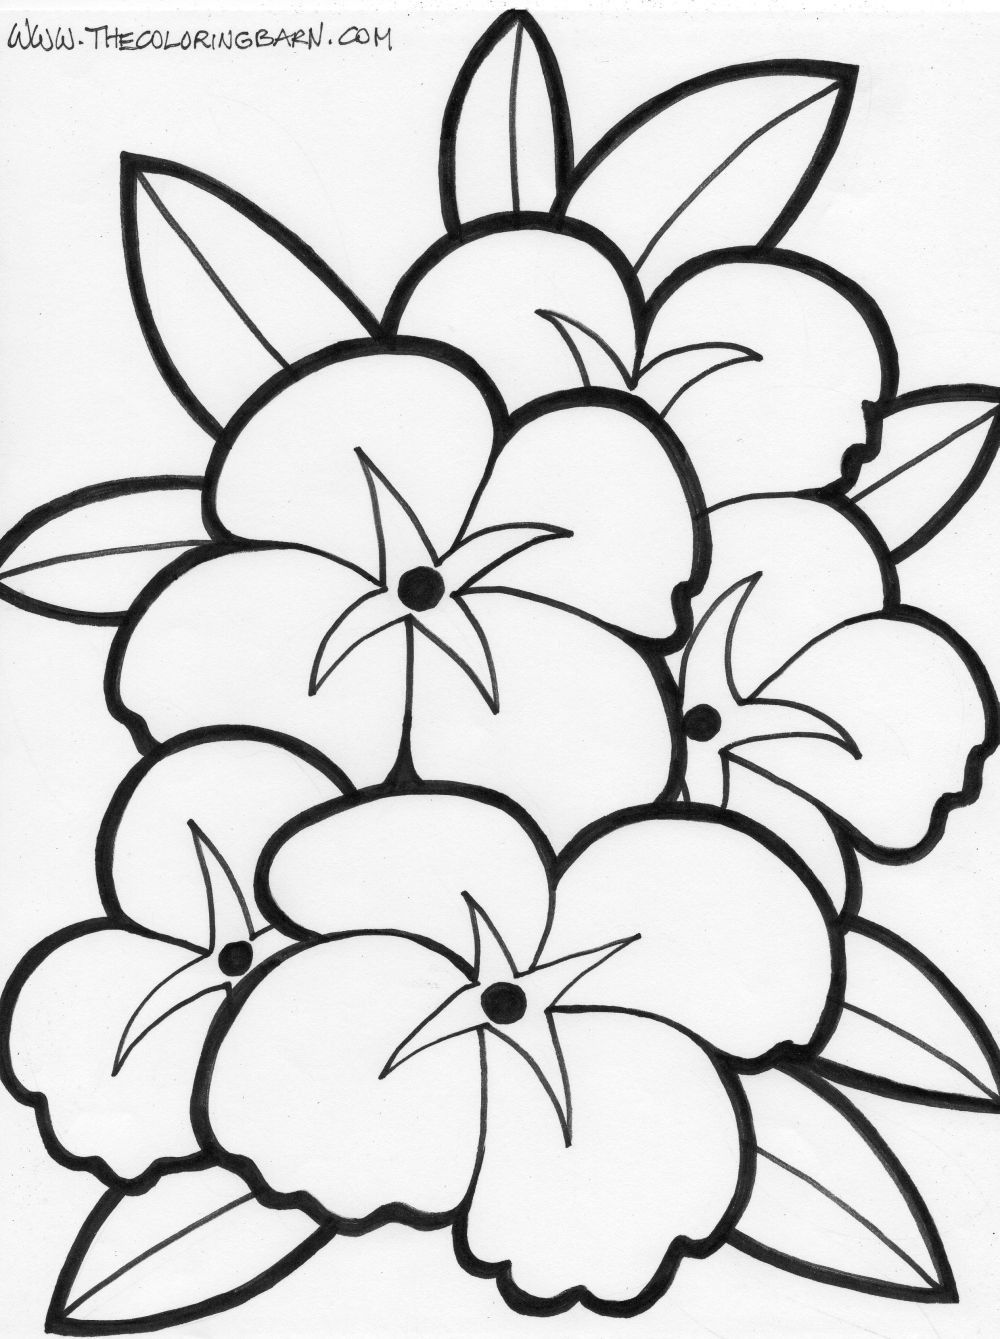 Large Flower Coloring Page - youngandtae.com | Printable flower coloring  pages, Hawaiian flower drawing, Flower coloring pages